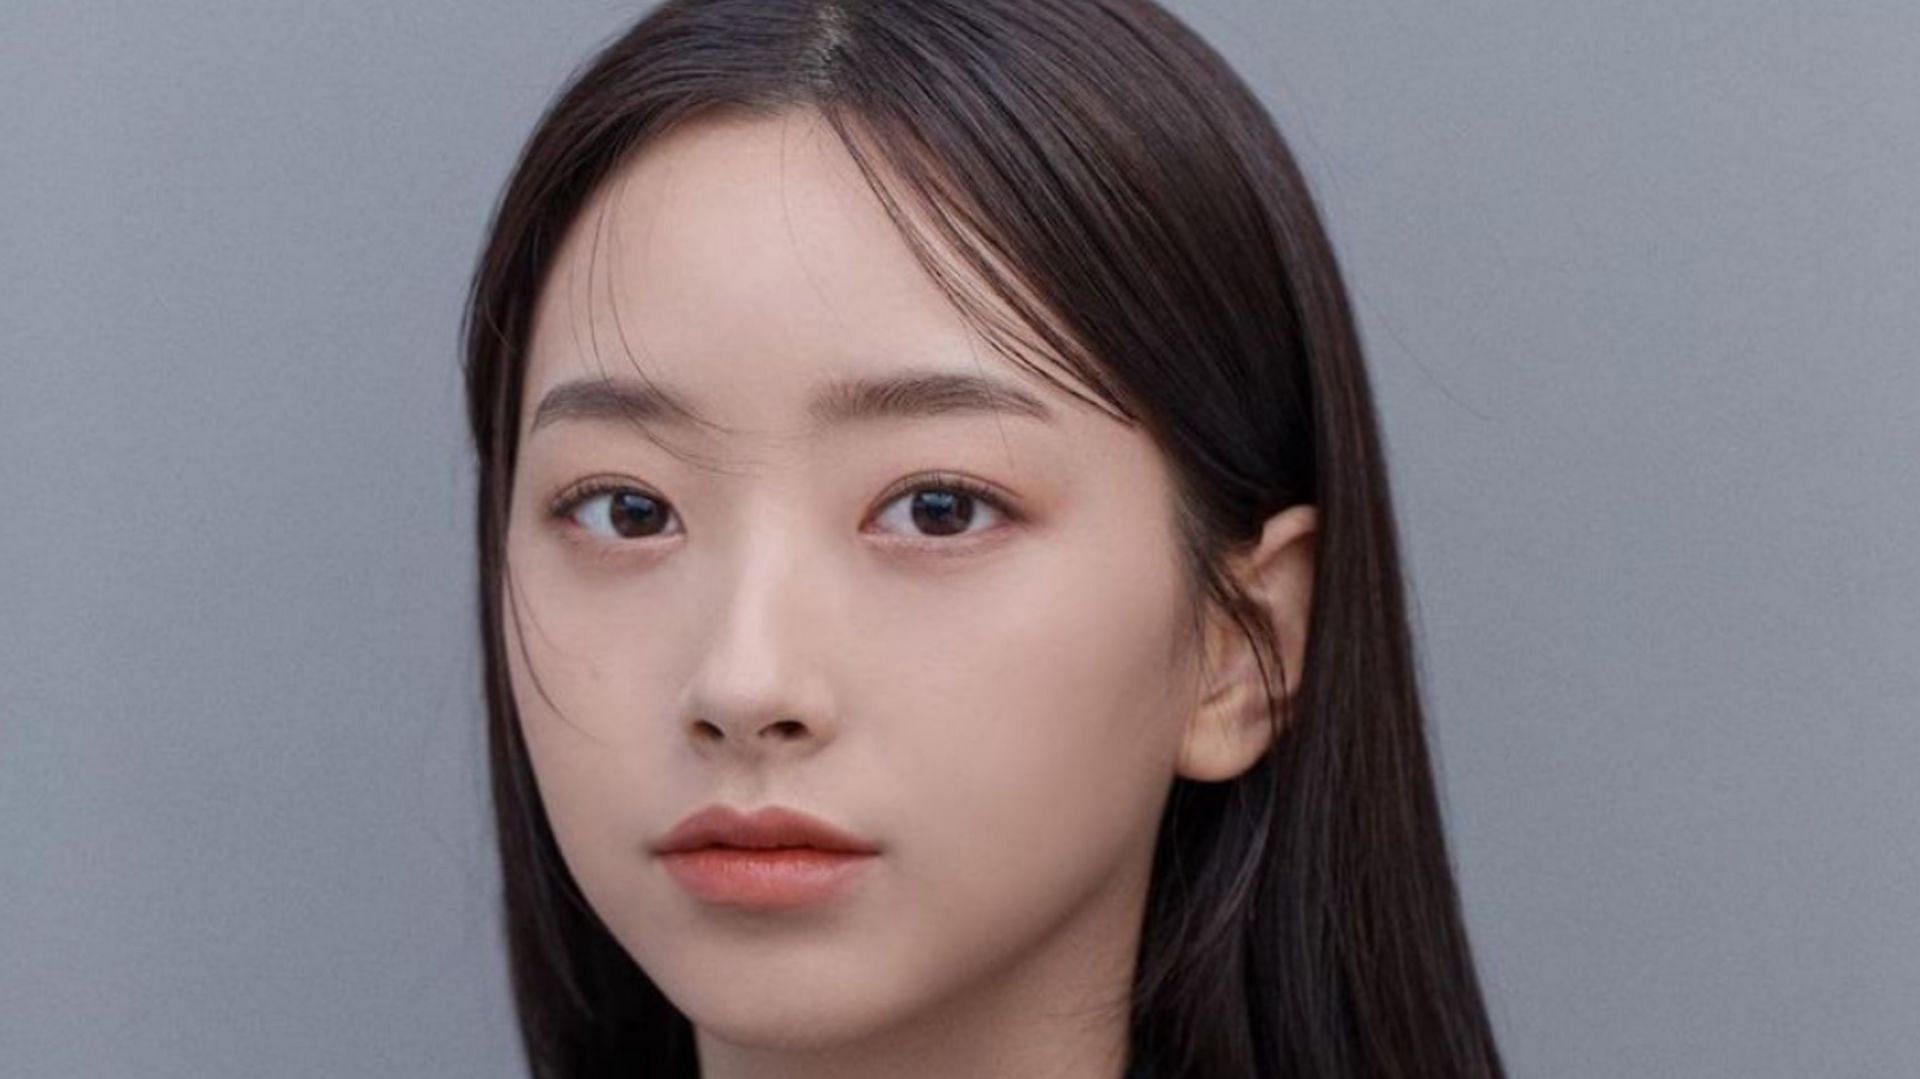 The rookie actor made her debut in 2020 (Image via SWMP)